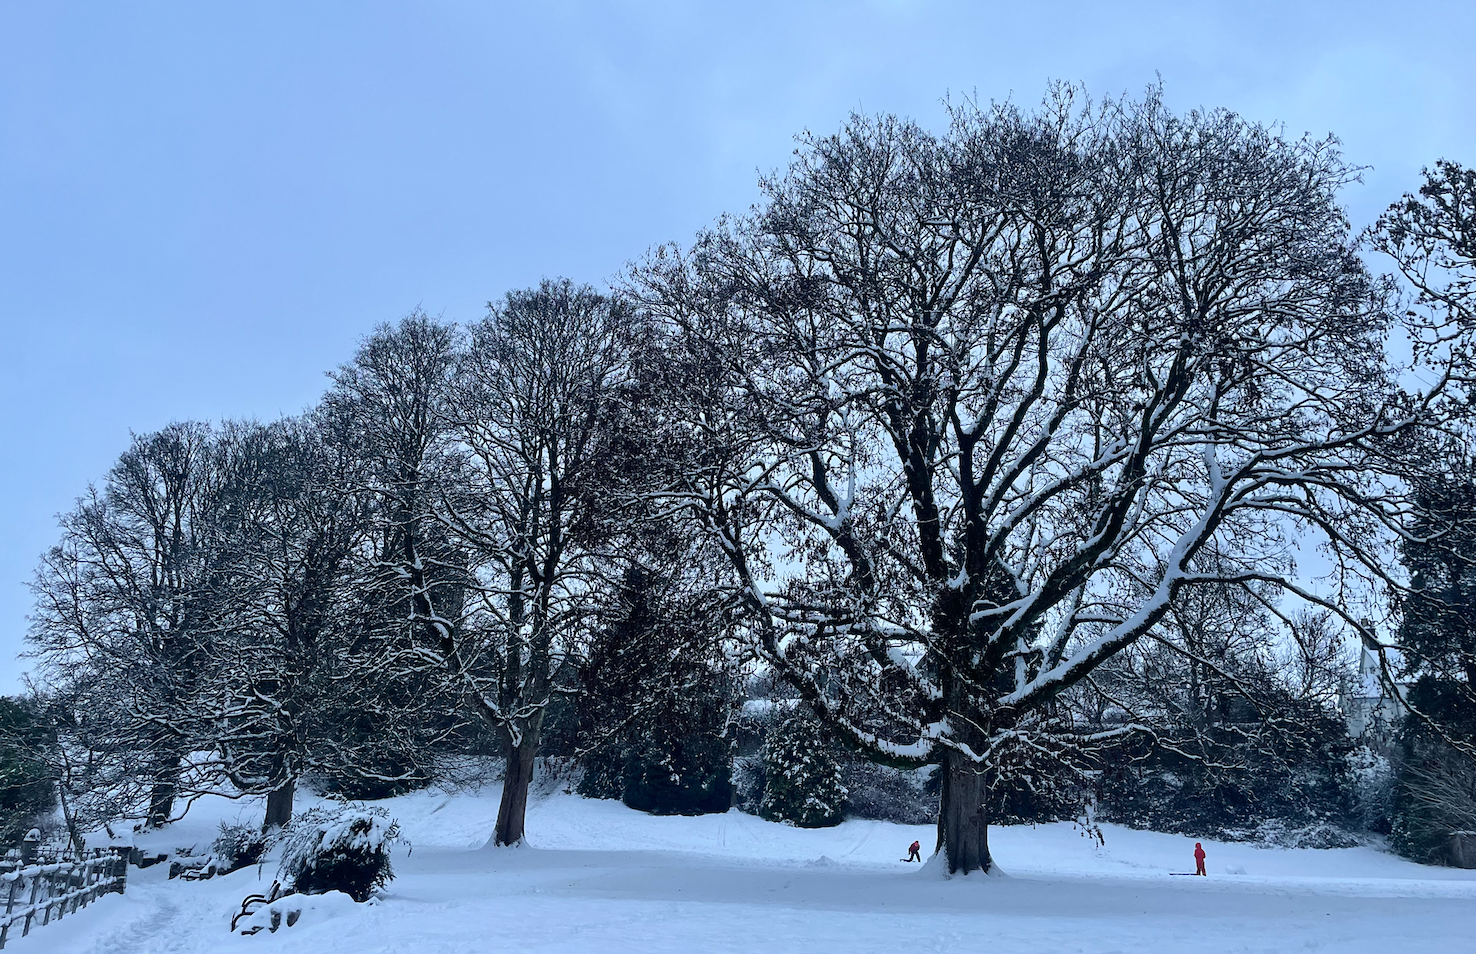 A photo of bare trees with snow on its branches, standing amid a blanket of snow.